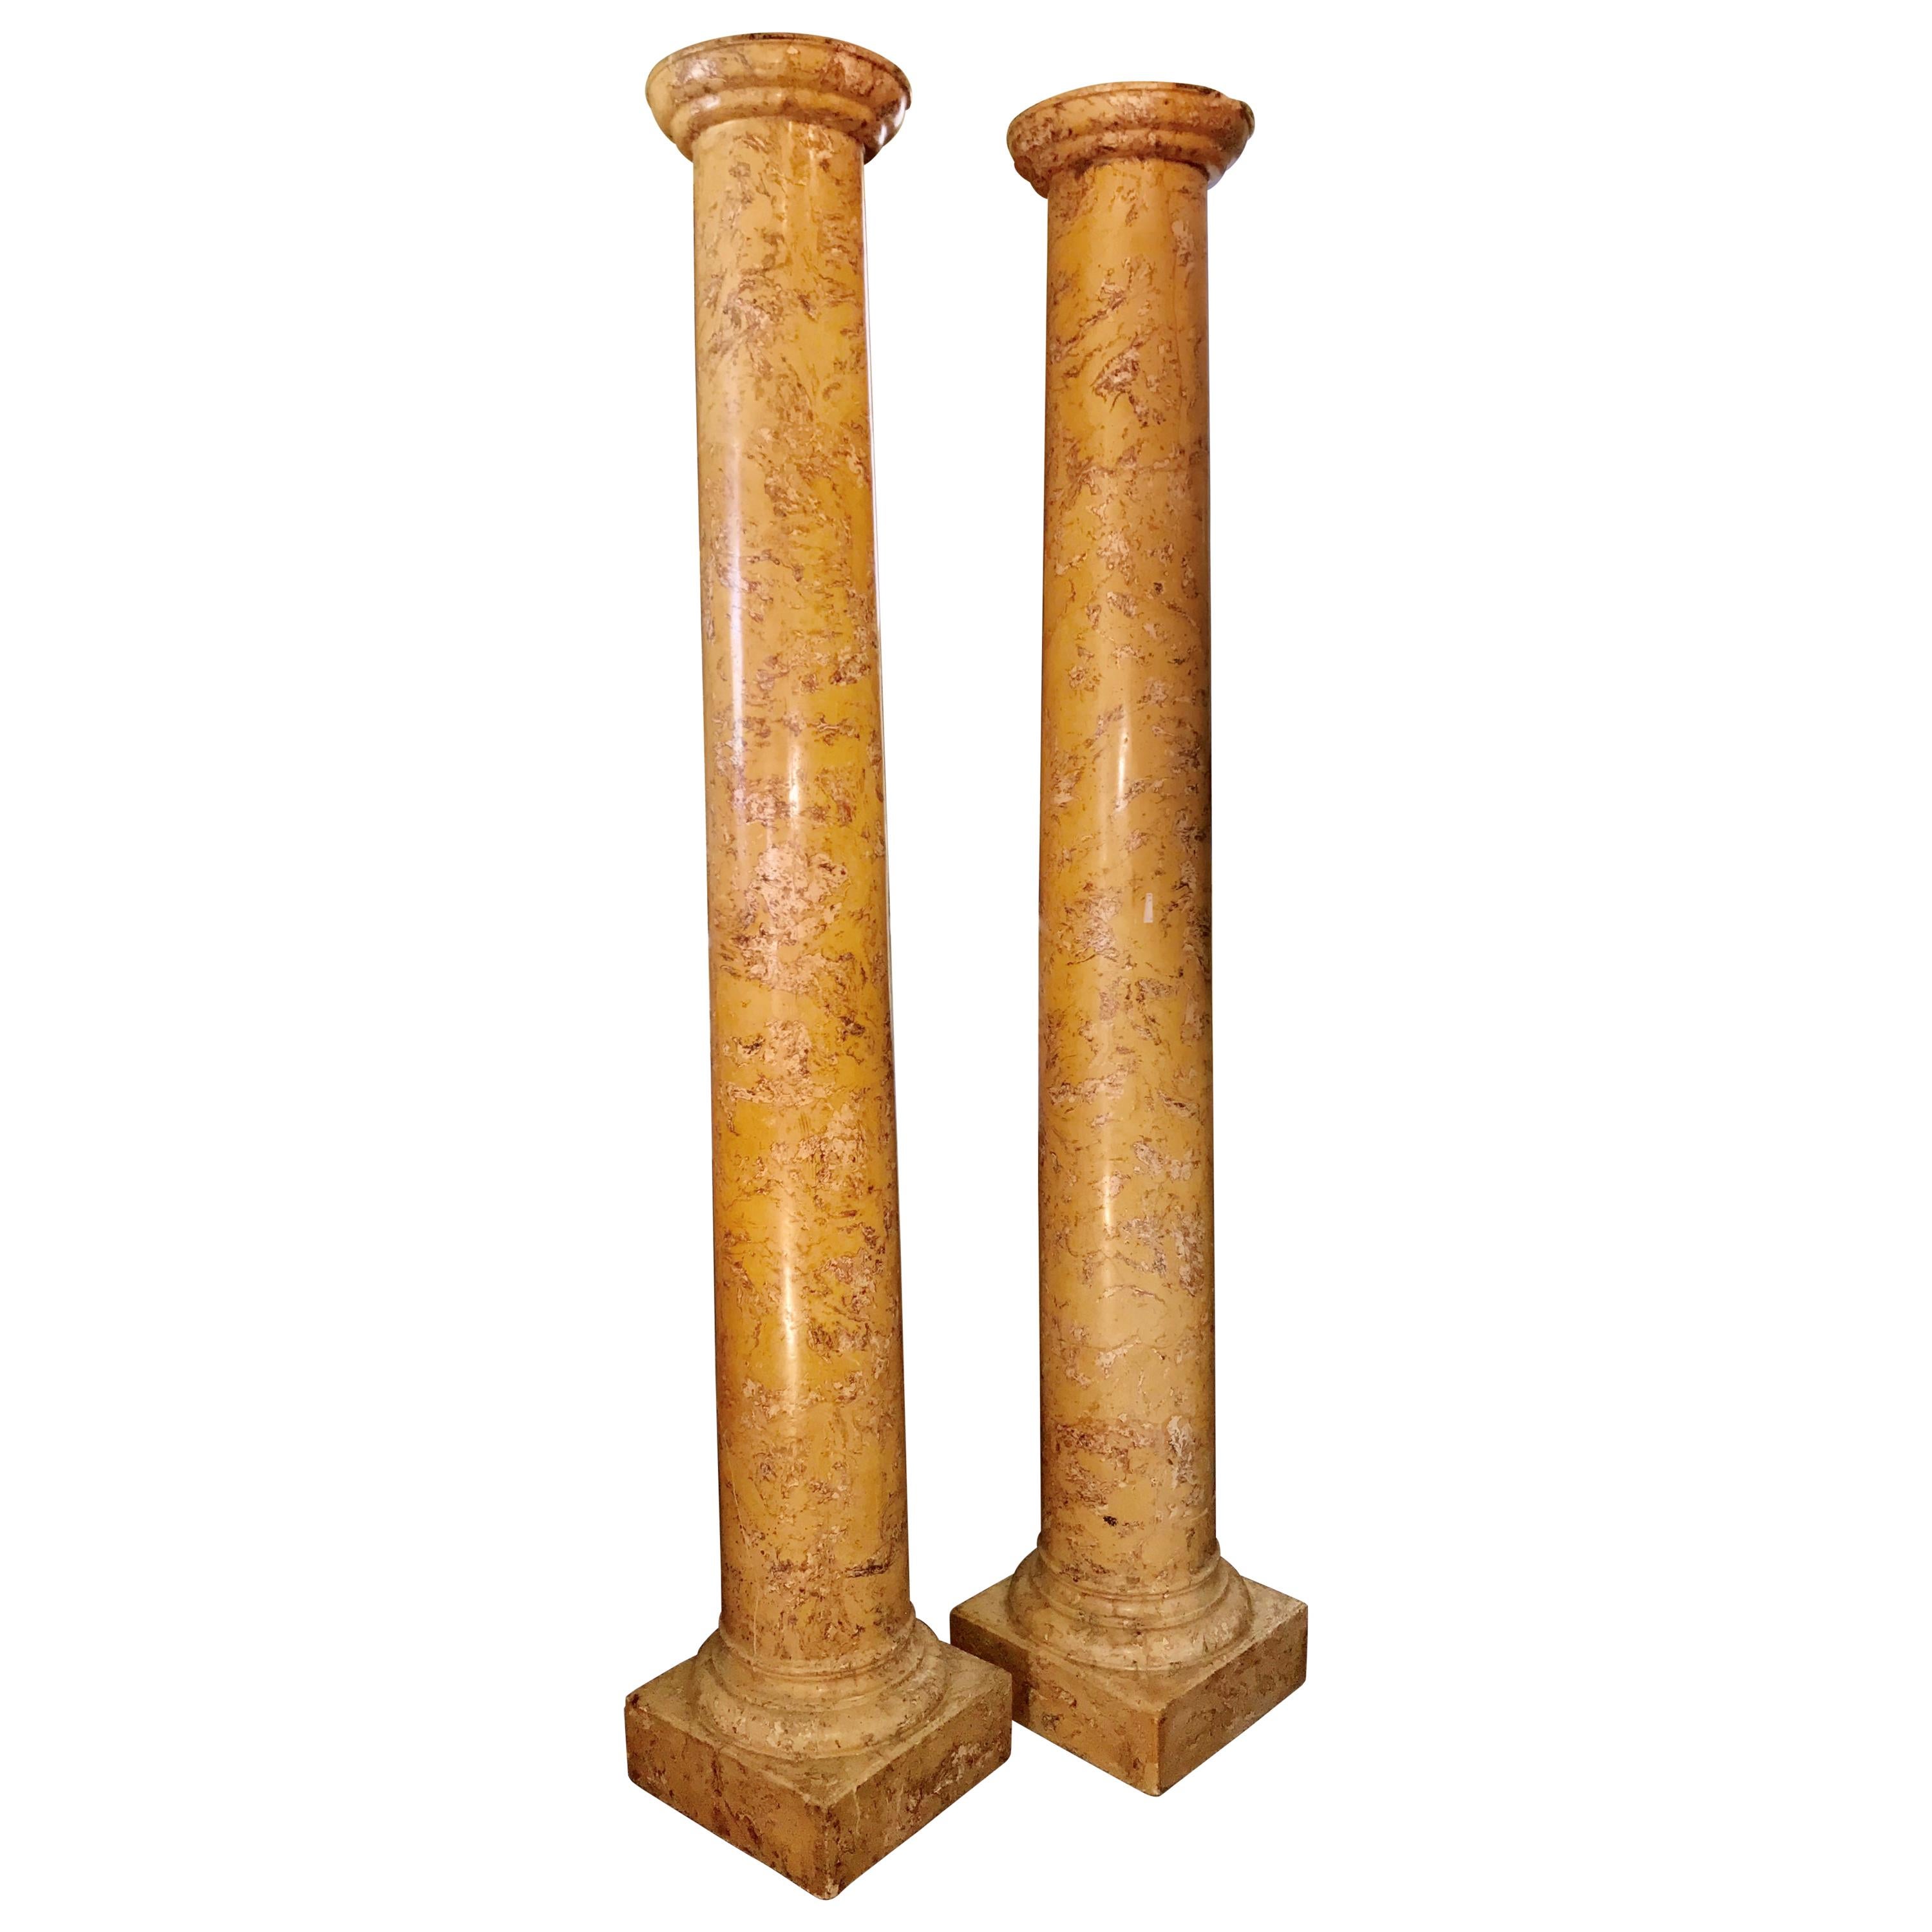 Pair of Tall Faux Sienna Marble Tuscan Style Columns